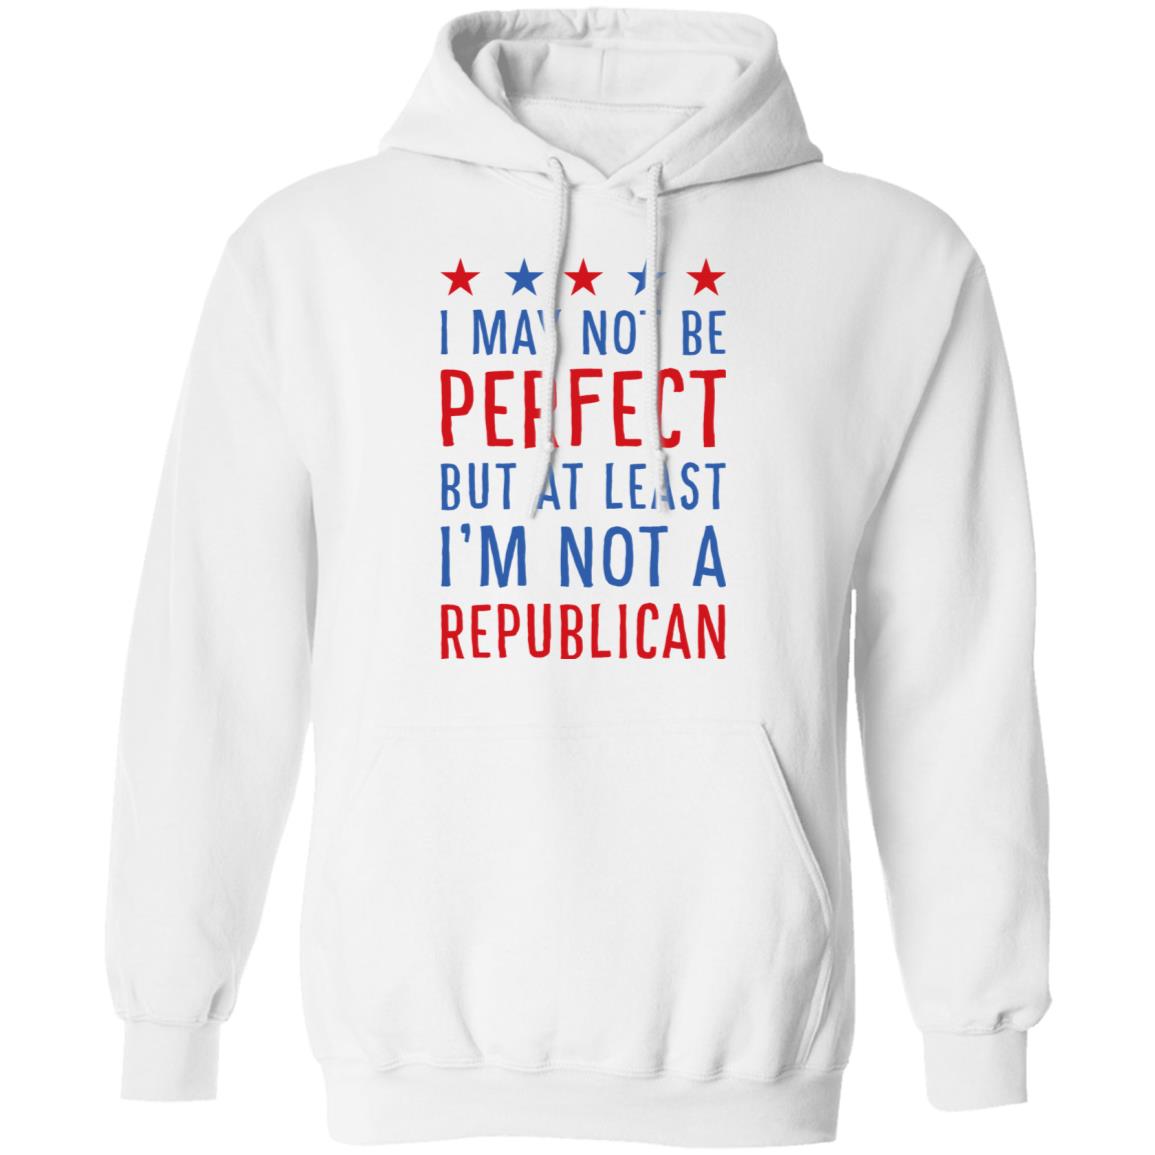 I May Not Be Perfect But At Least I’m Not A Republican Shirt 2